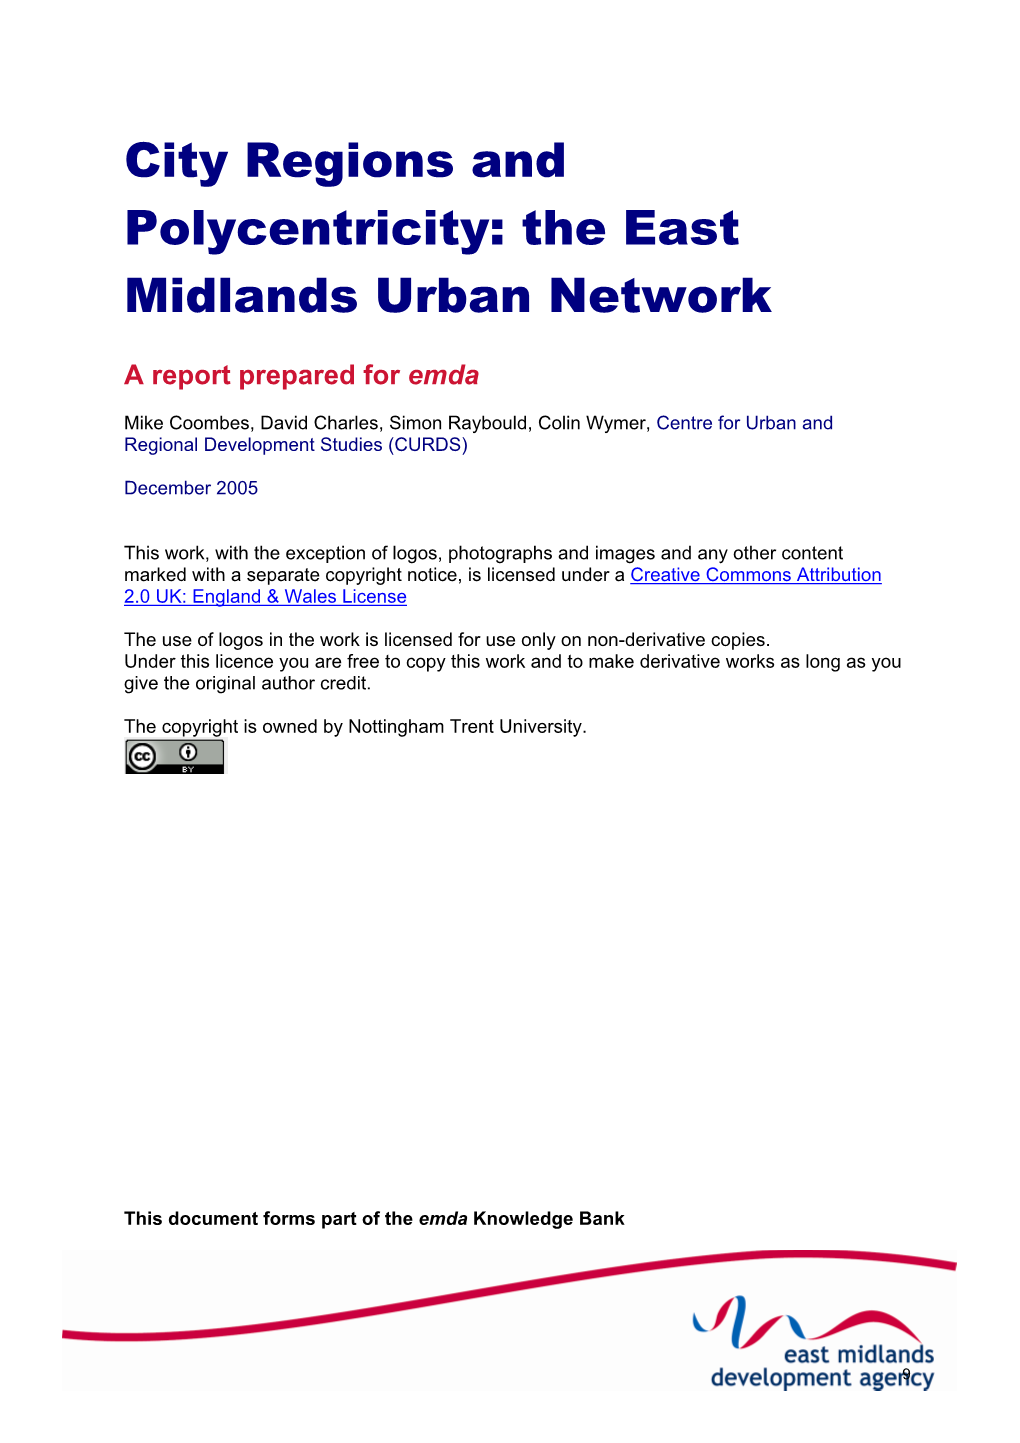 City Regions and Polycentricity: the East Midlands Urban Network